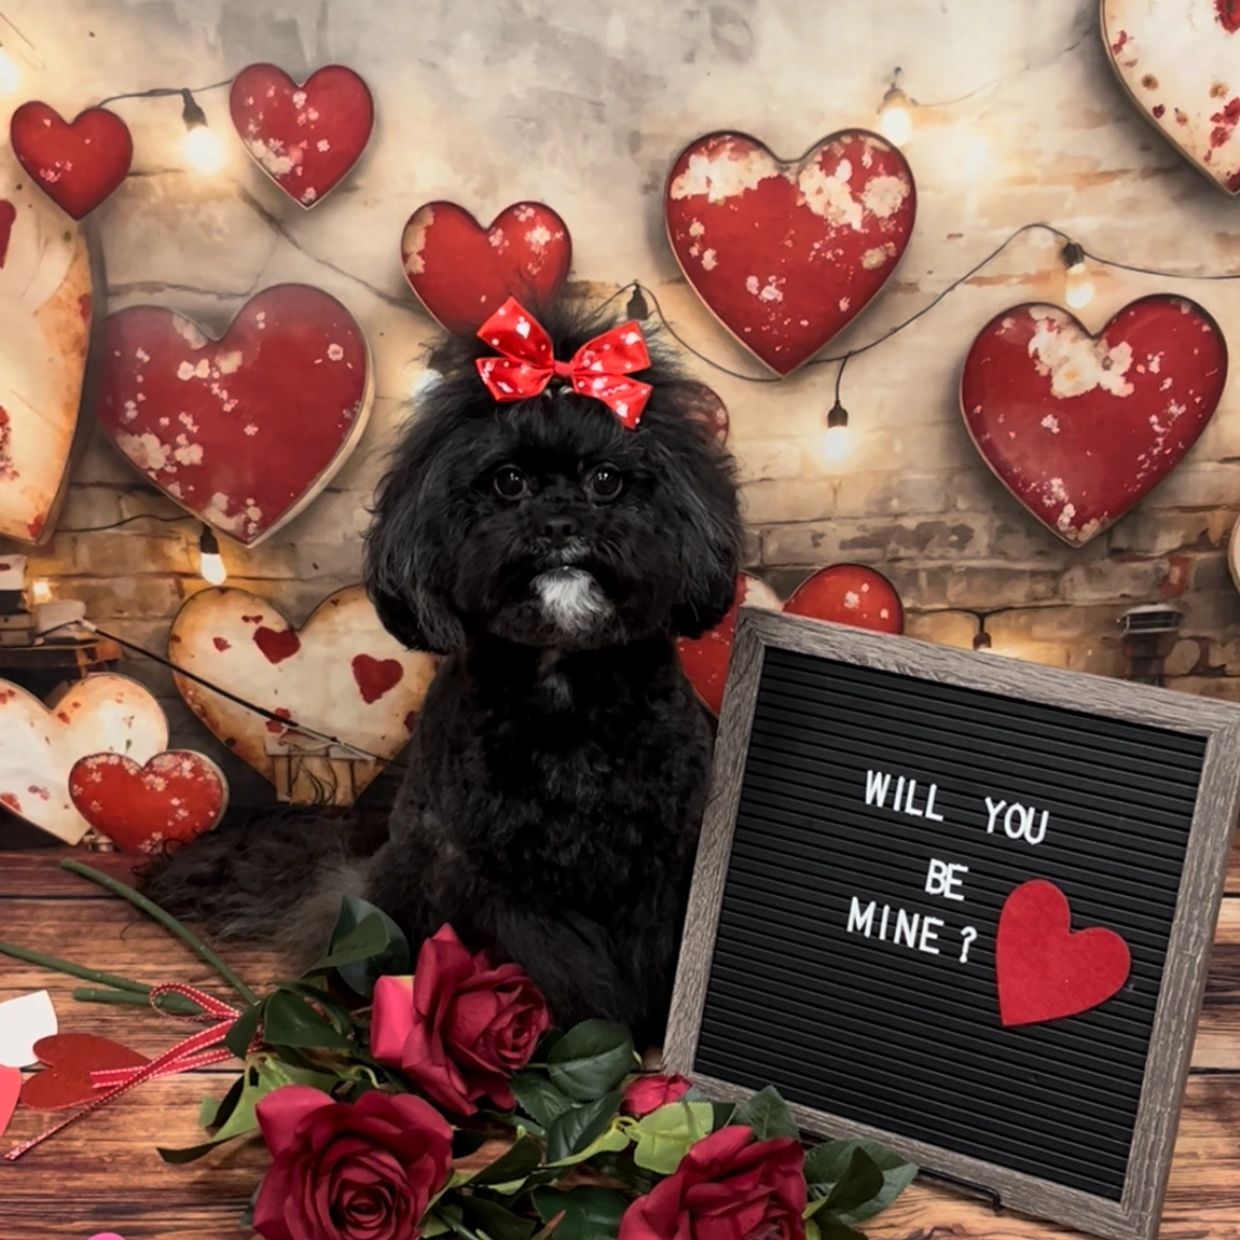 black dog with red bow in hair posing next to a sign "will you be mine?" surrounded by hearts roses